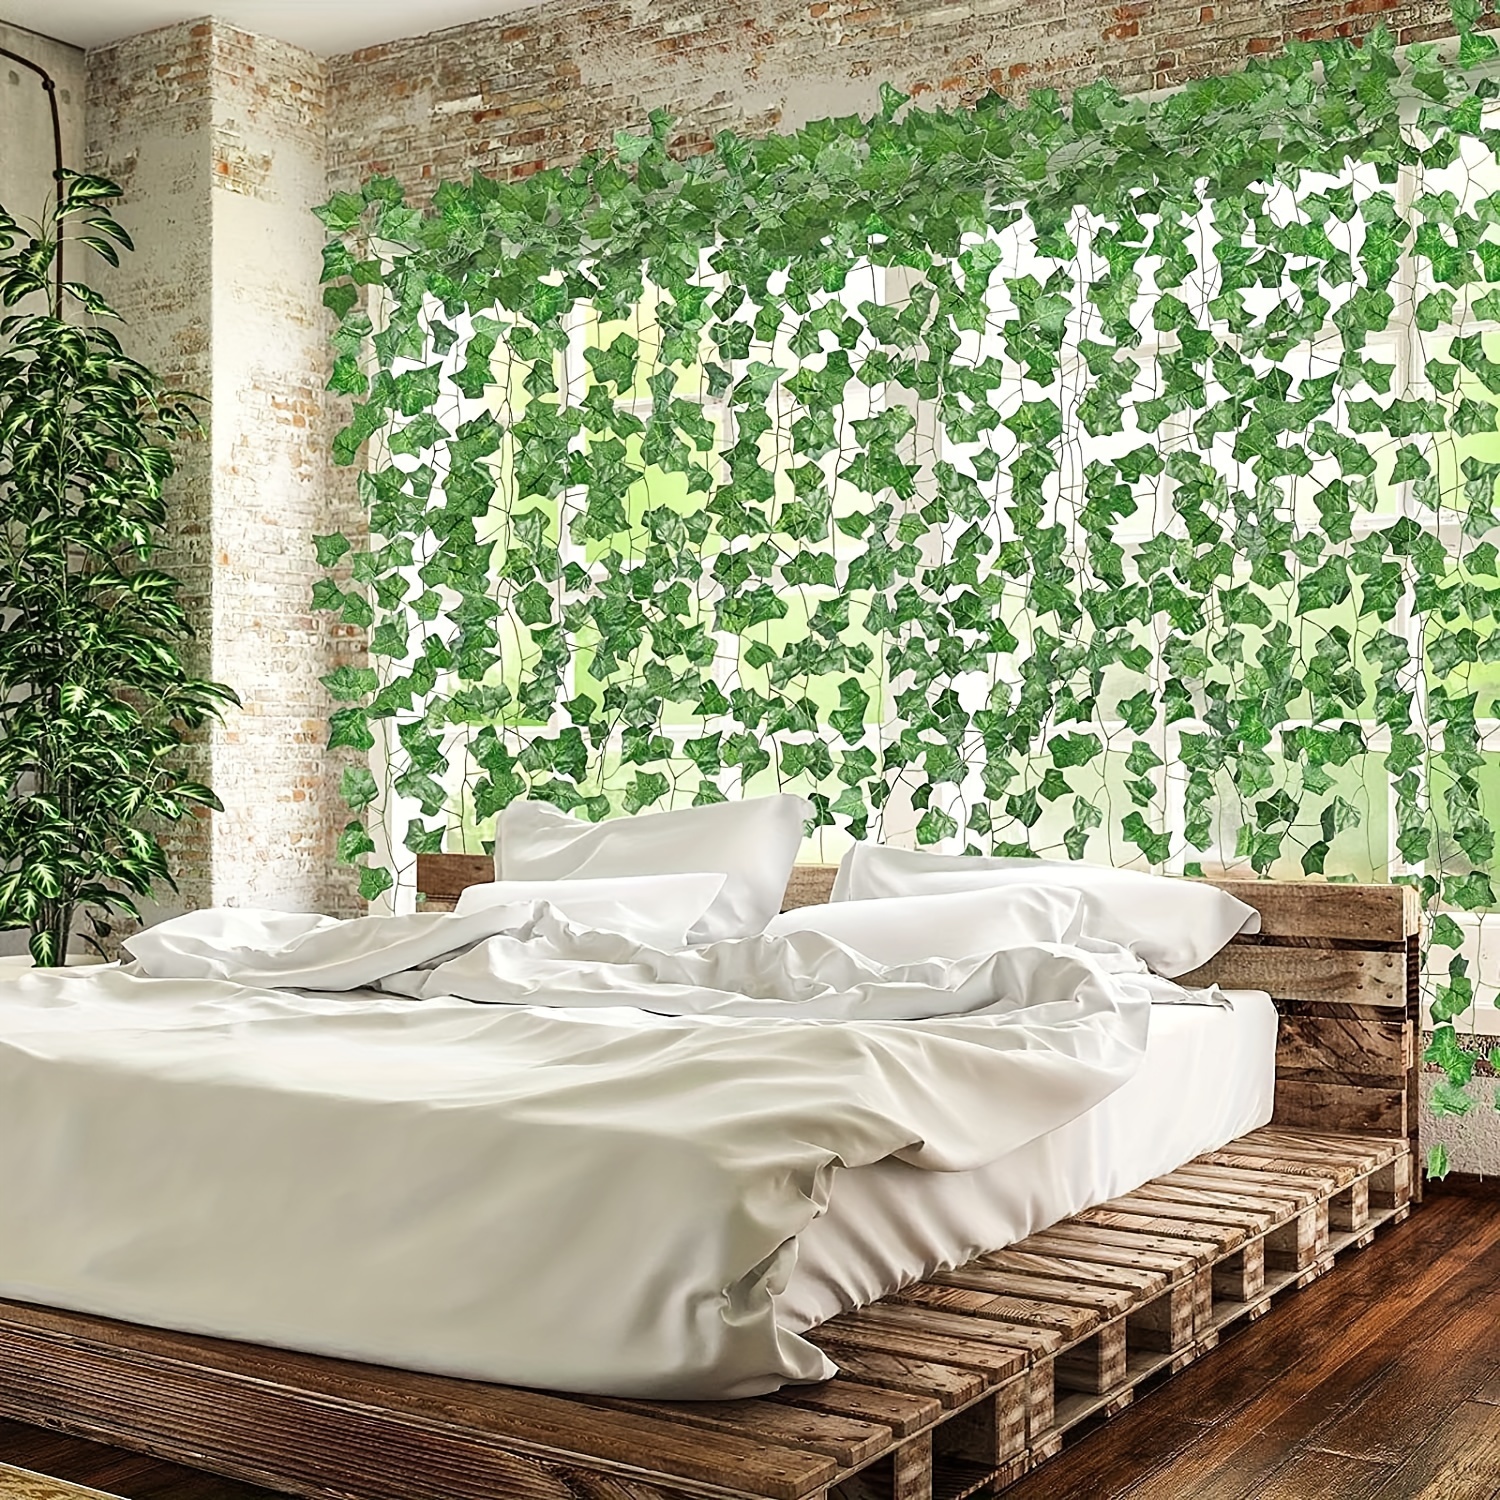 Cute House Fake Vines for Room Decor - 12 Pack Ivy Vines for Bedroom  Artificial Ivy Garland for Wall Decor